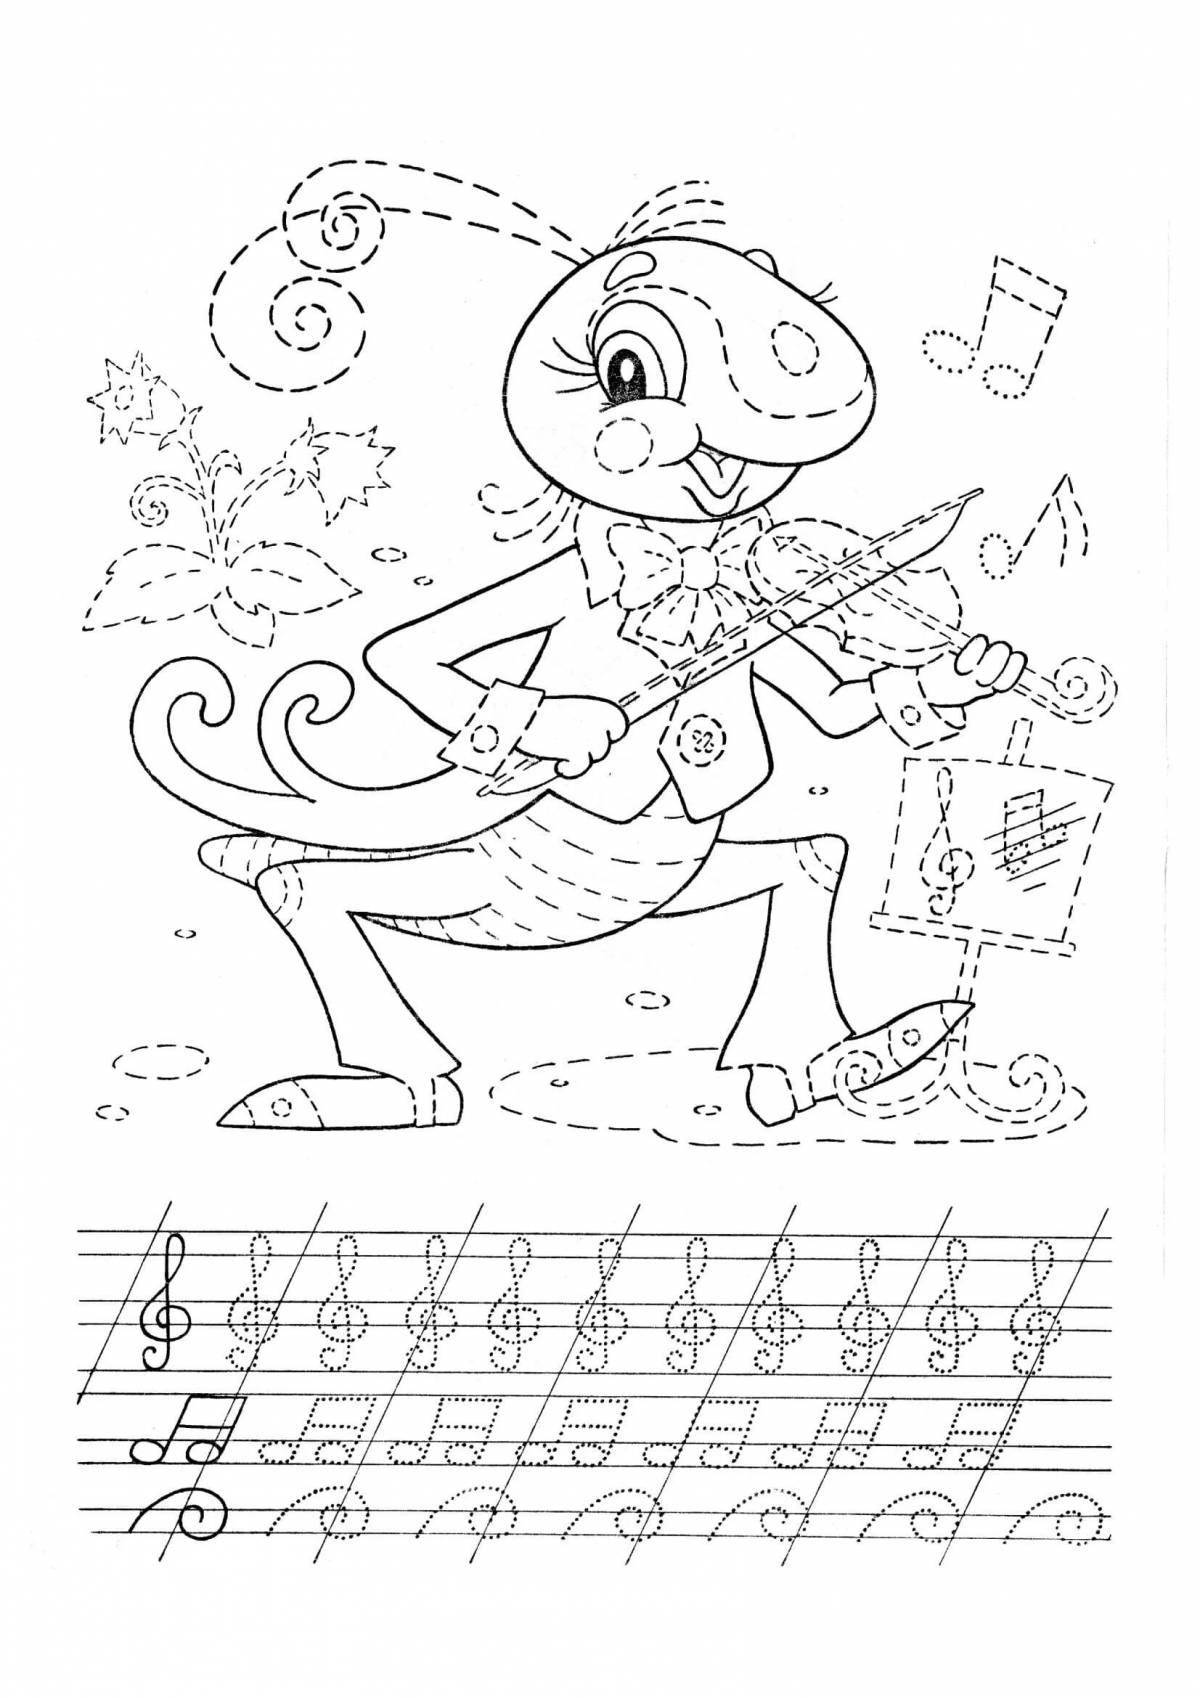 Charming music grade 1 coloring book